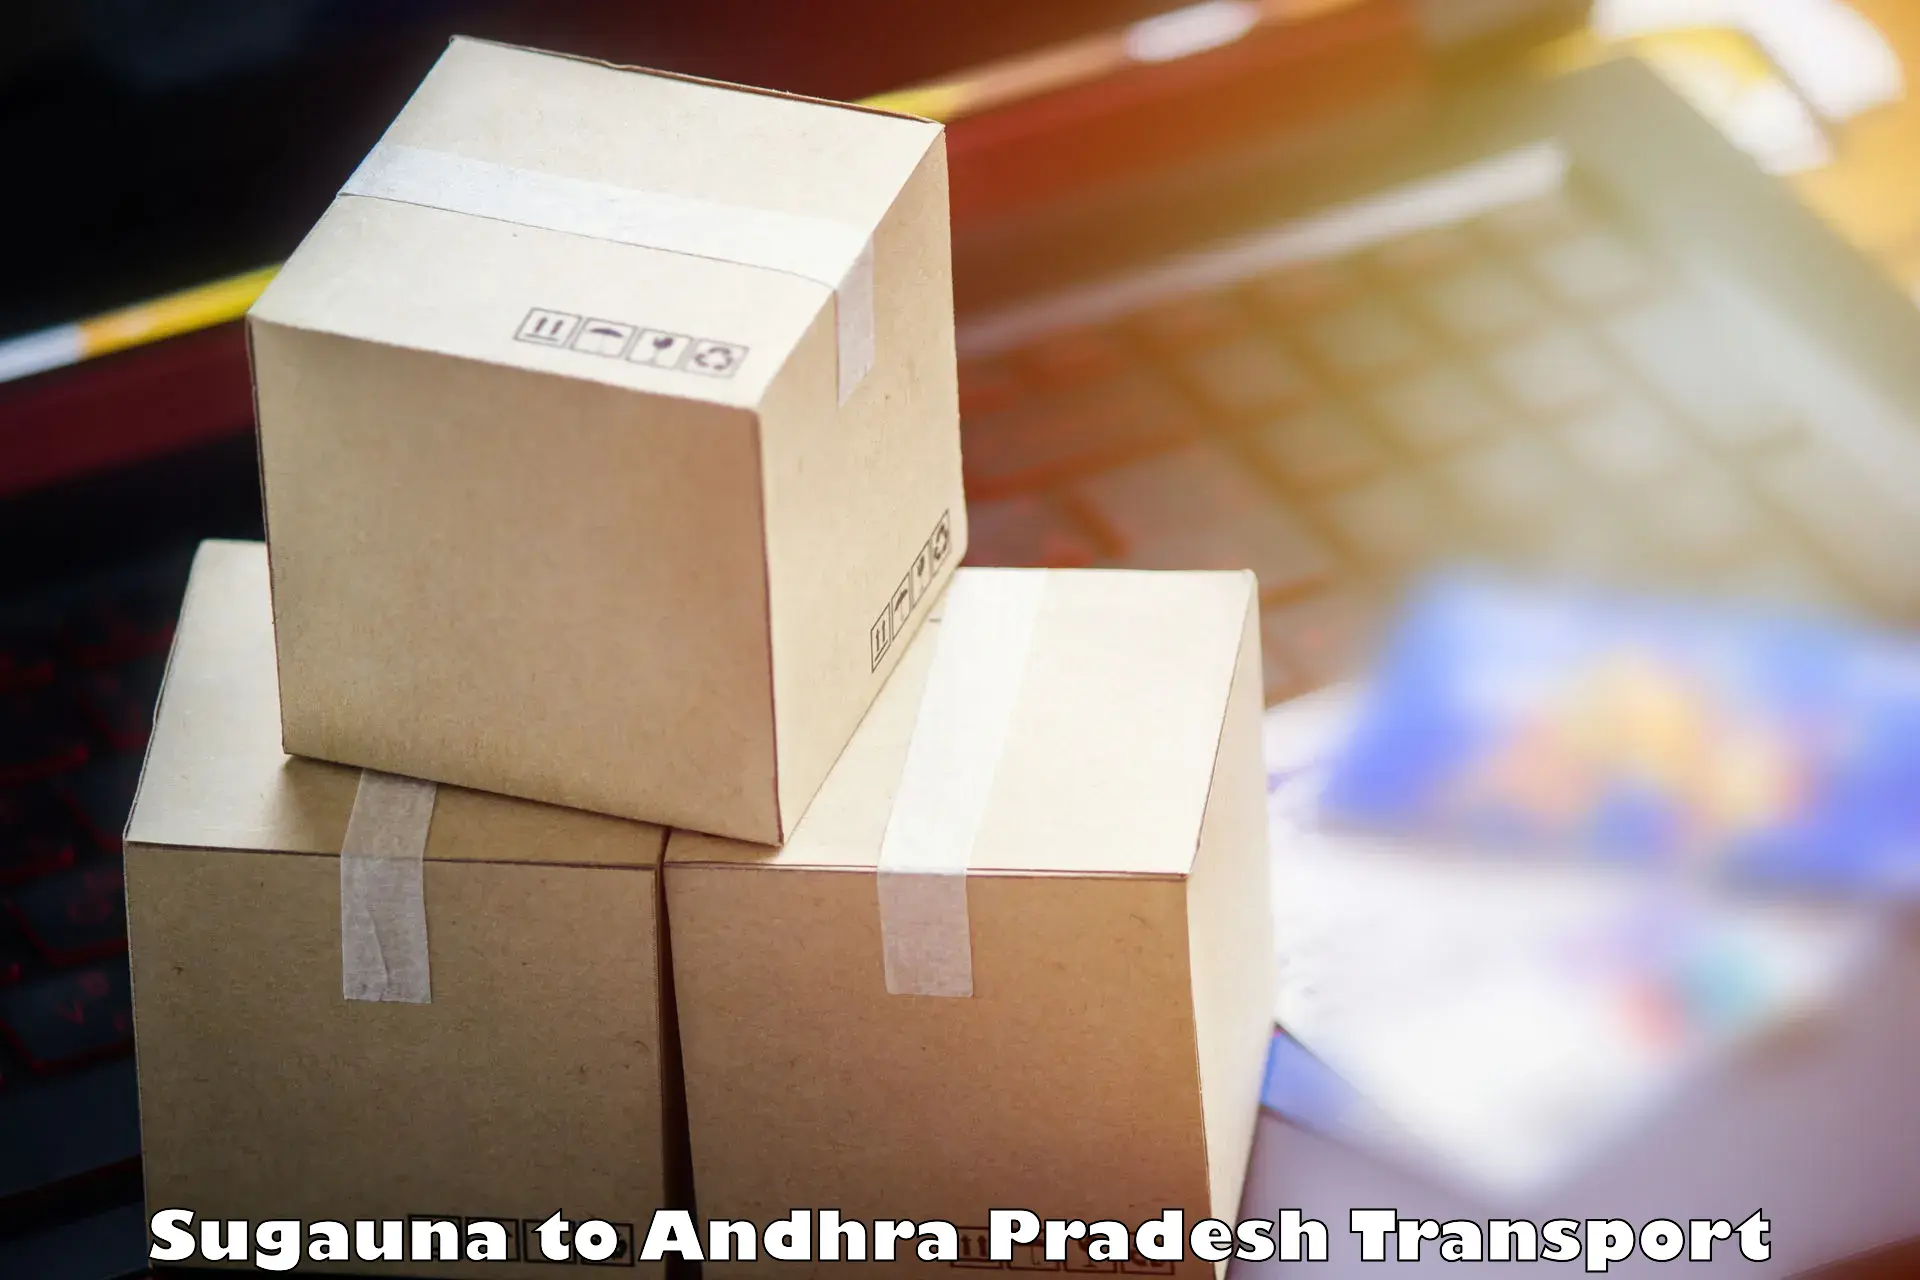 Transport bike from one state to another Sugauna to Andhra Pradesh